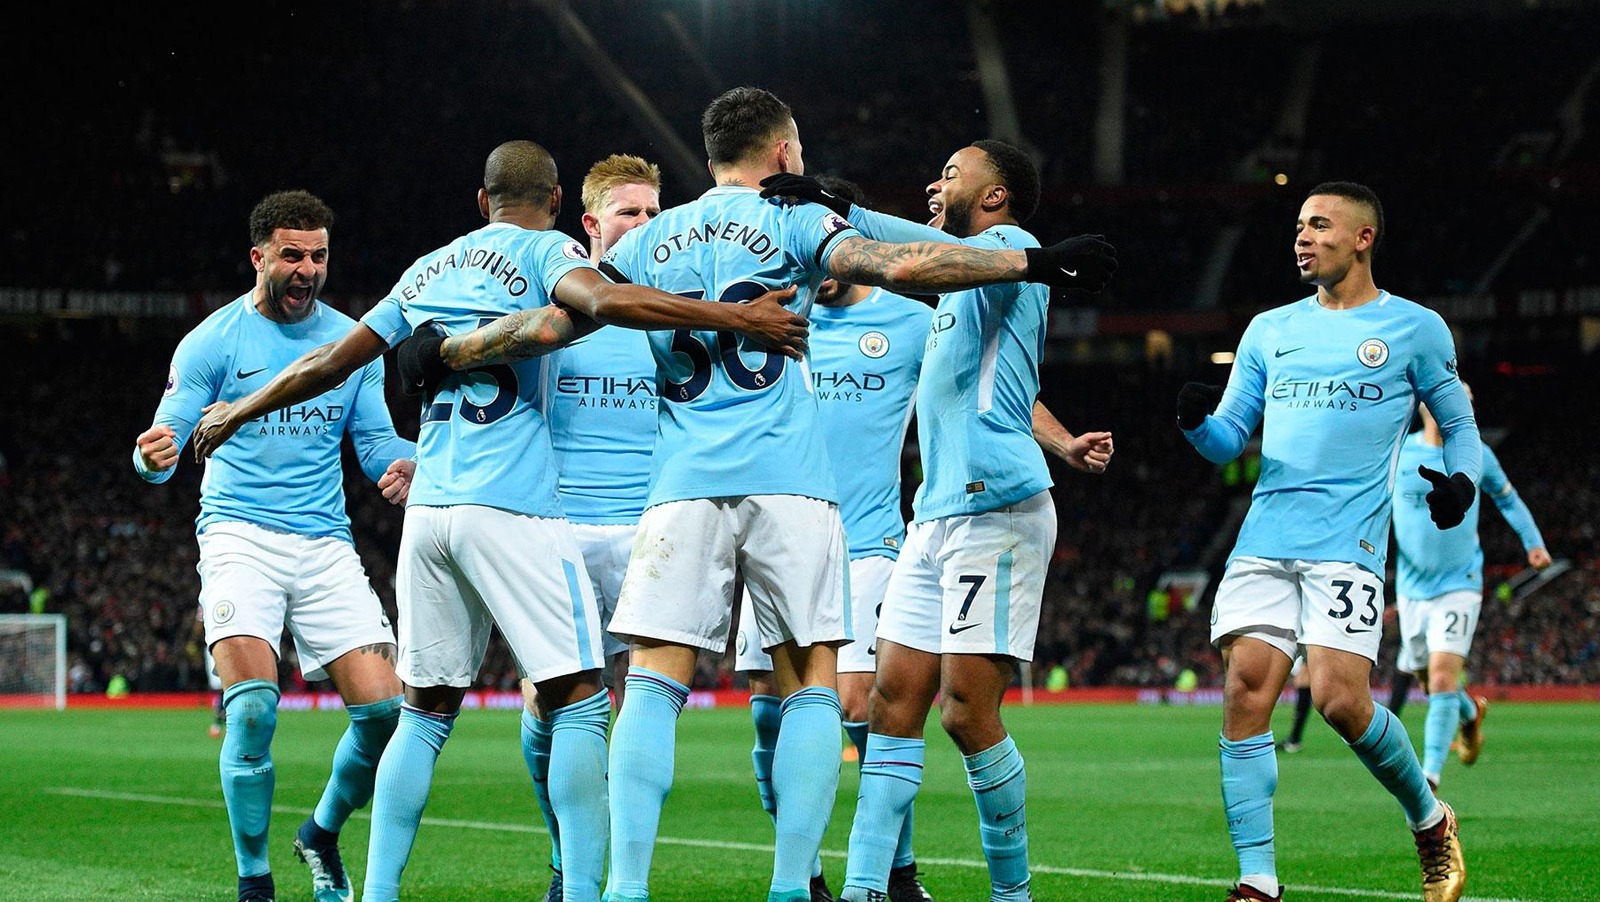 EPL Review Week 16: The title race is over after City beat Utd